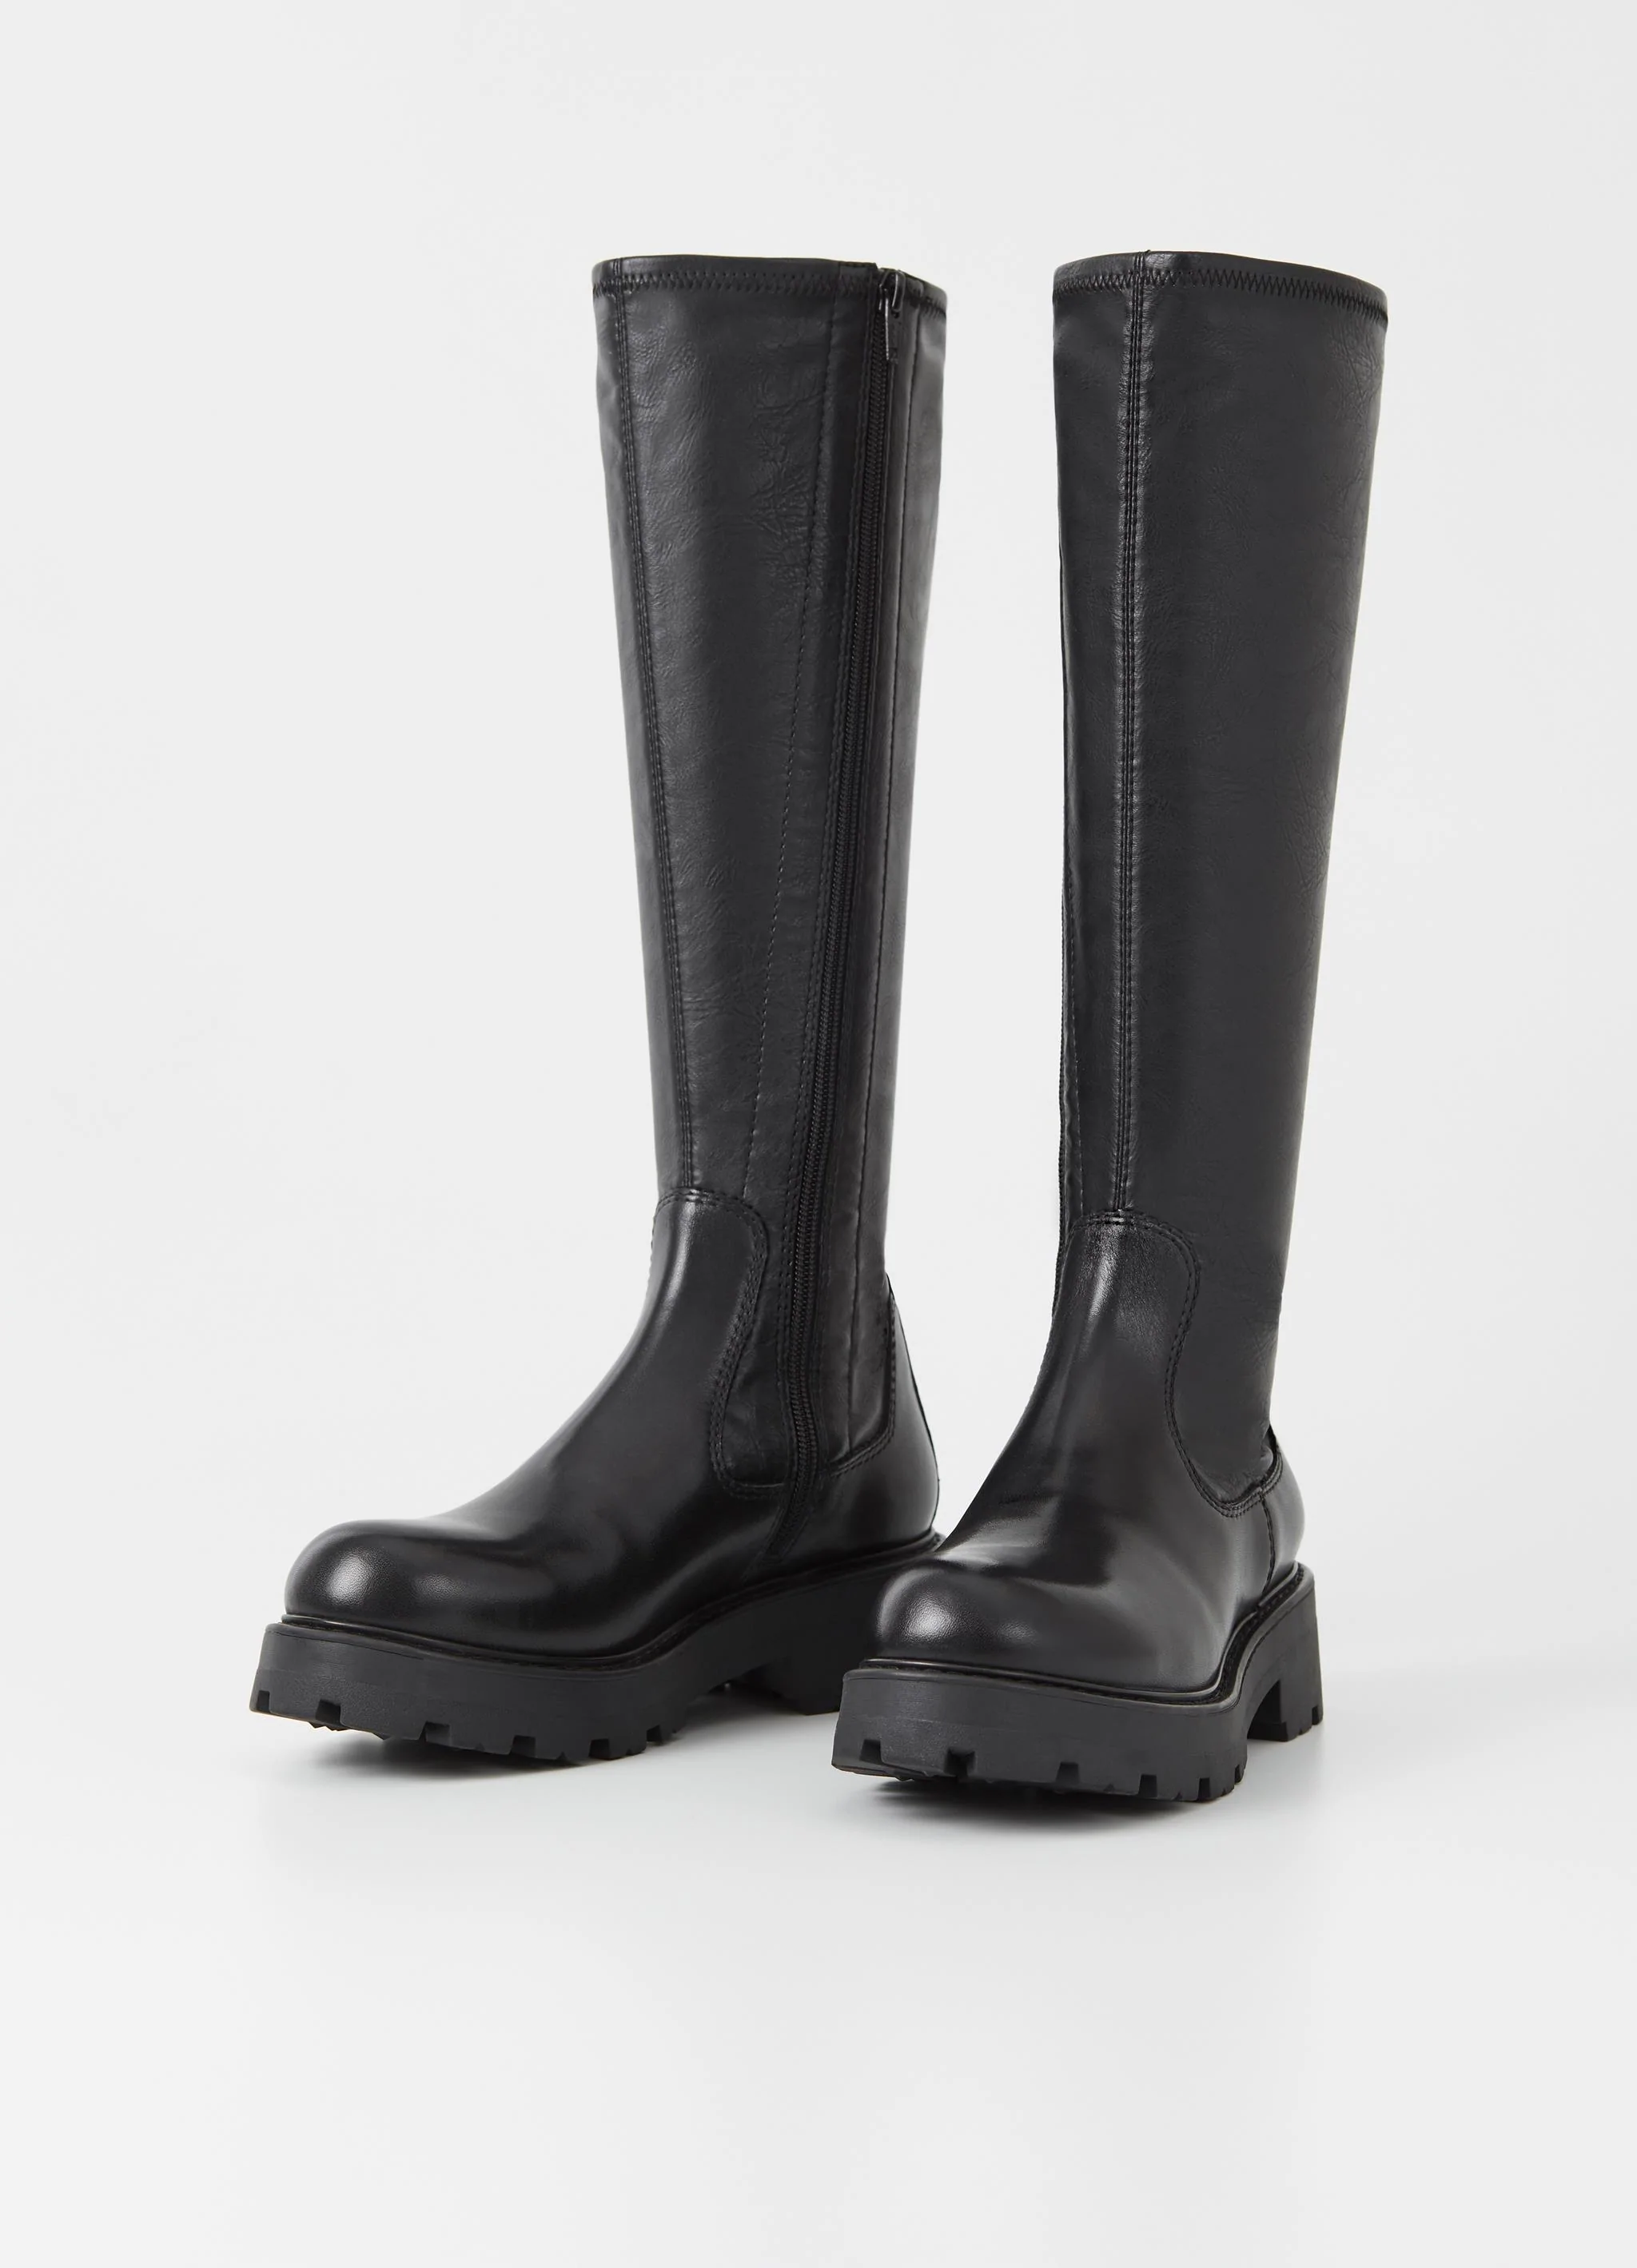 Product Image for Cosmo 2.0 Tall Boots, Black